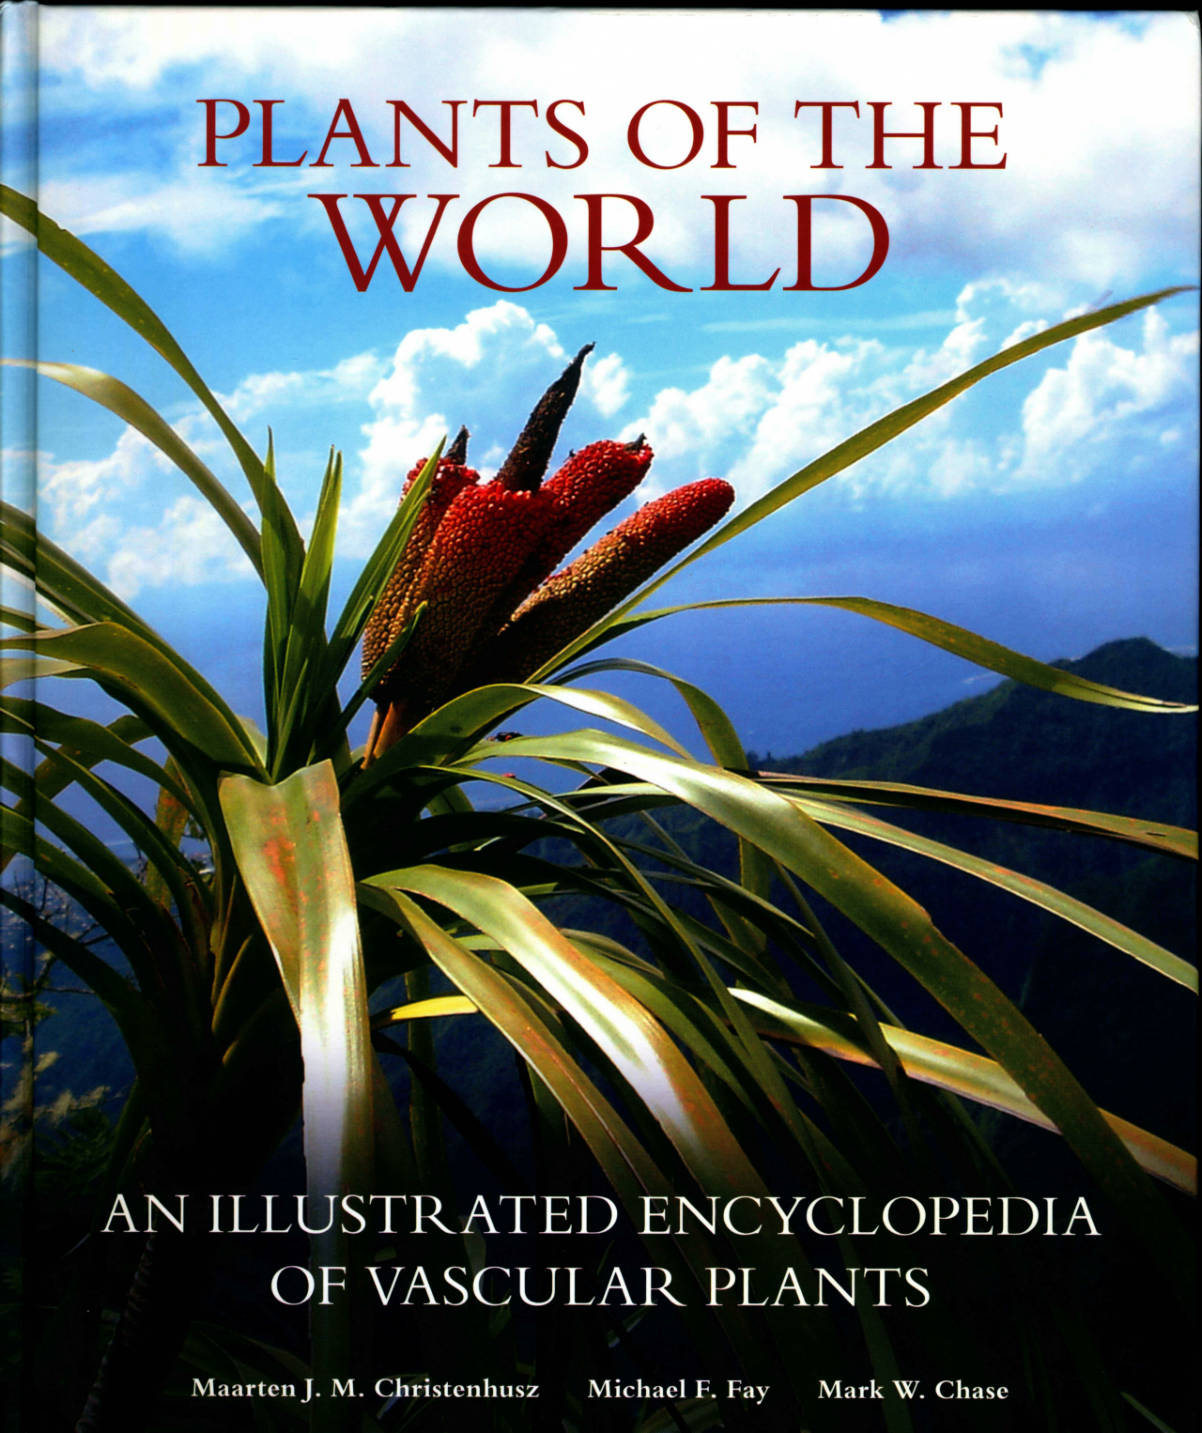 PLANTS OF THE WORLD AN ILLUSTRATED ENCYCLOPEDIA OF VASCULAR PLANTS